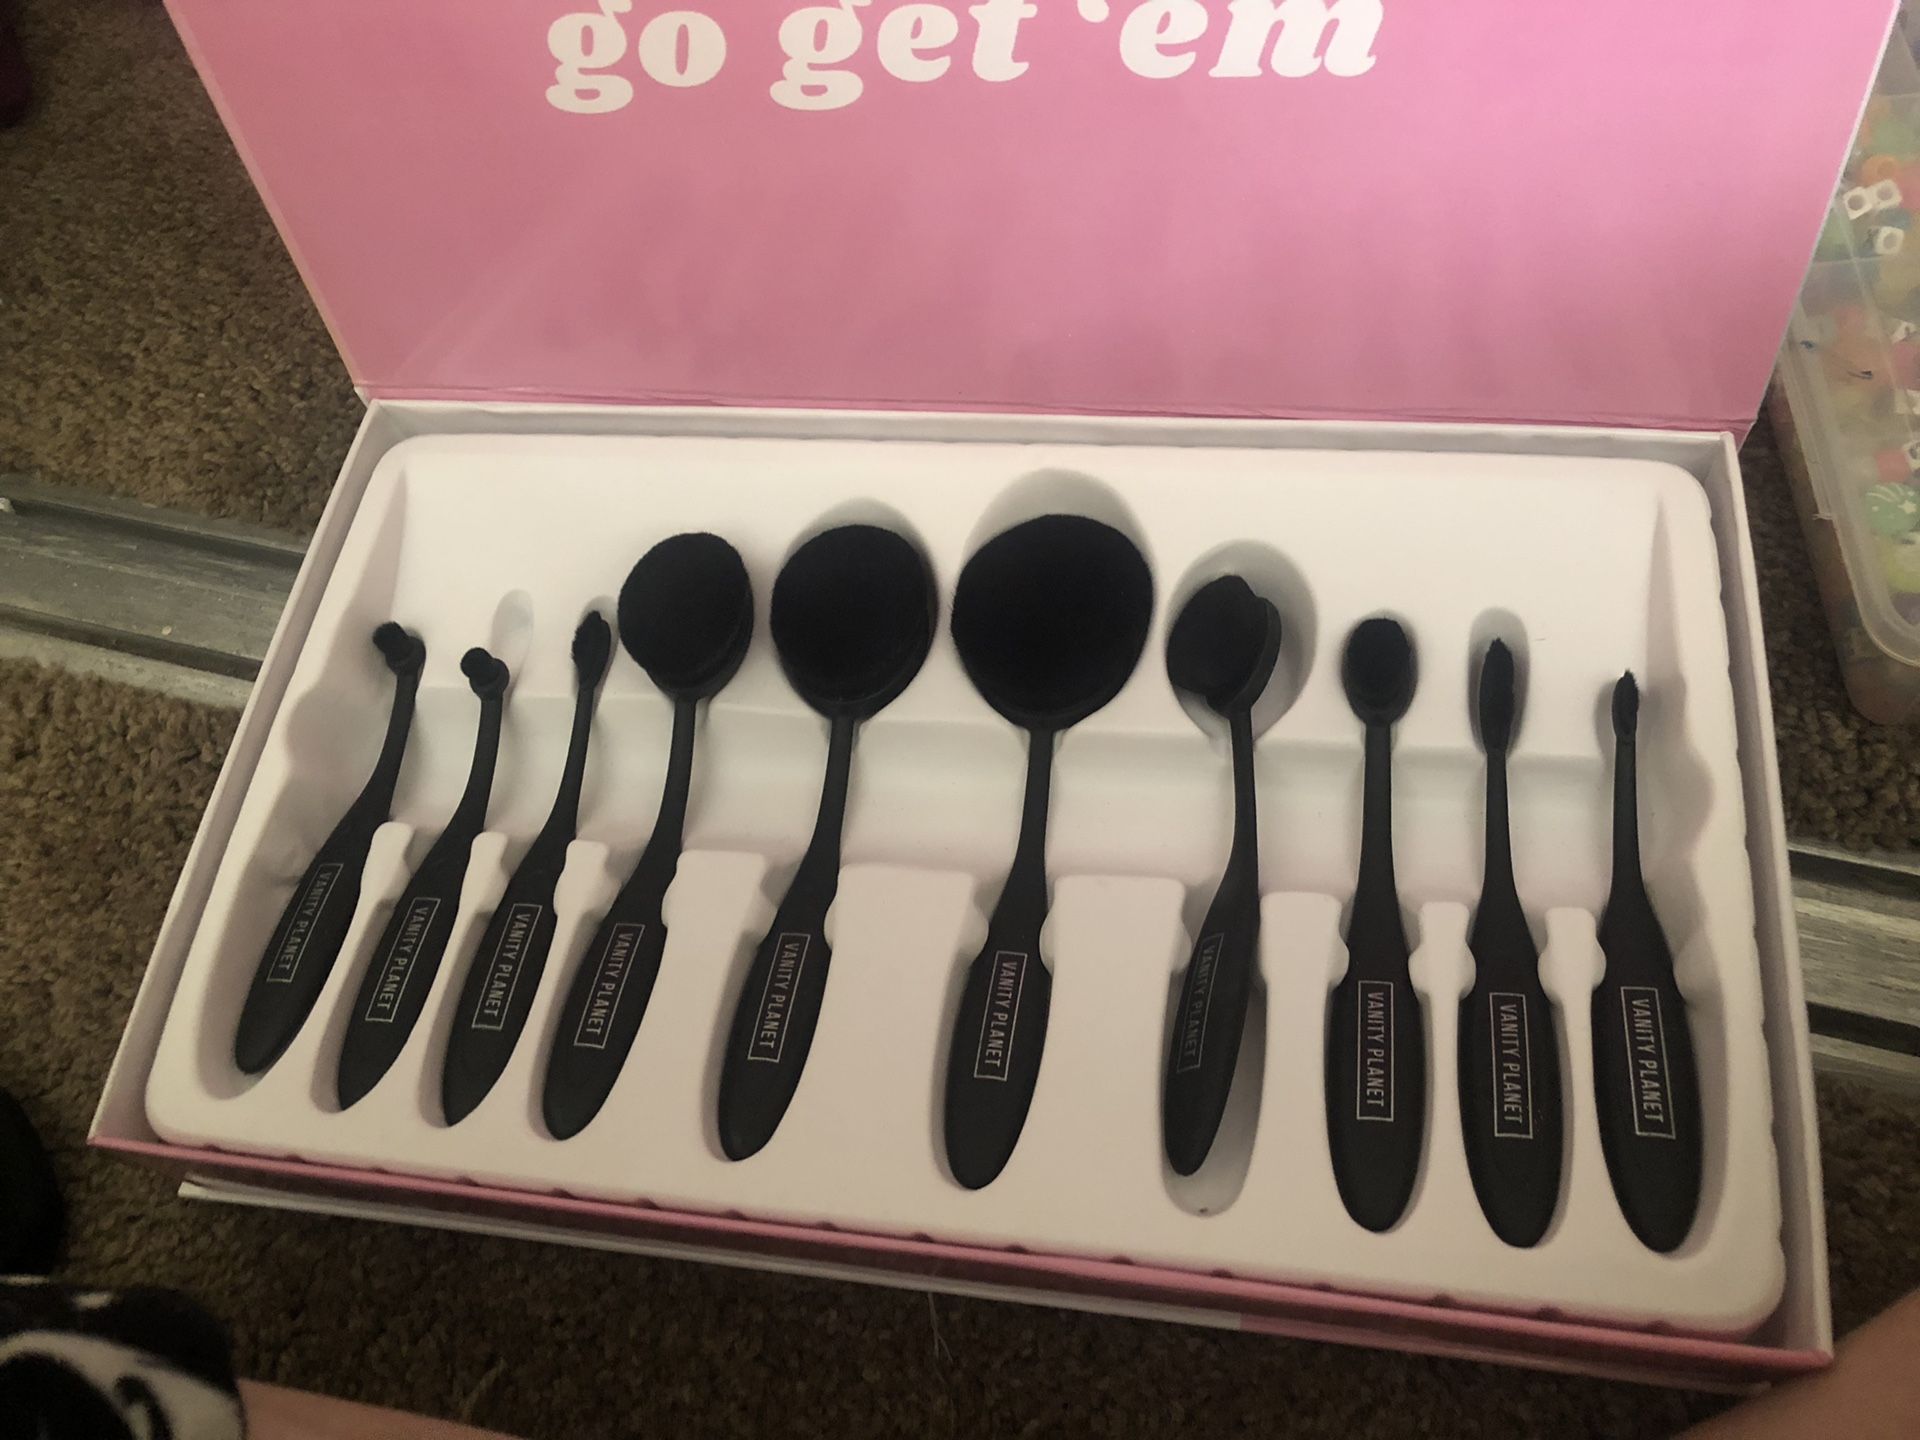 Planet vanity oval makeup brushes